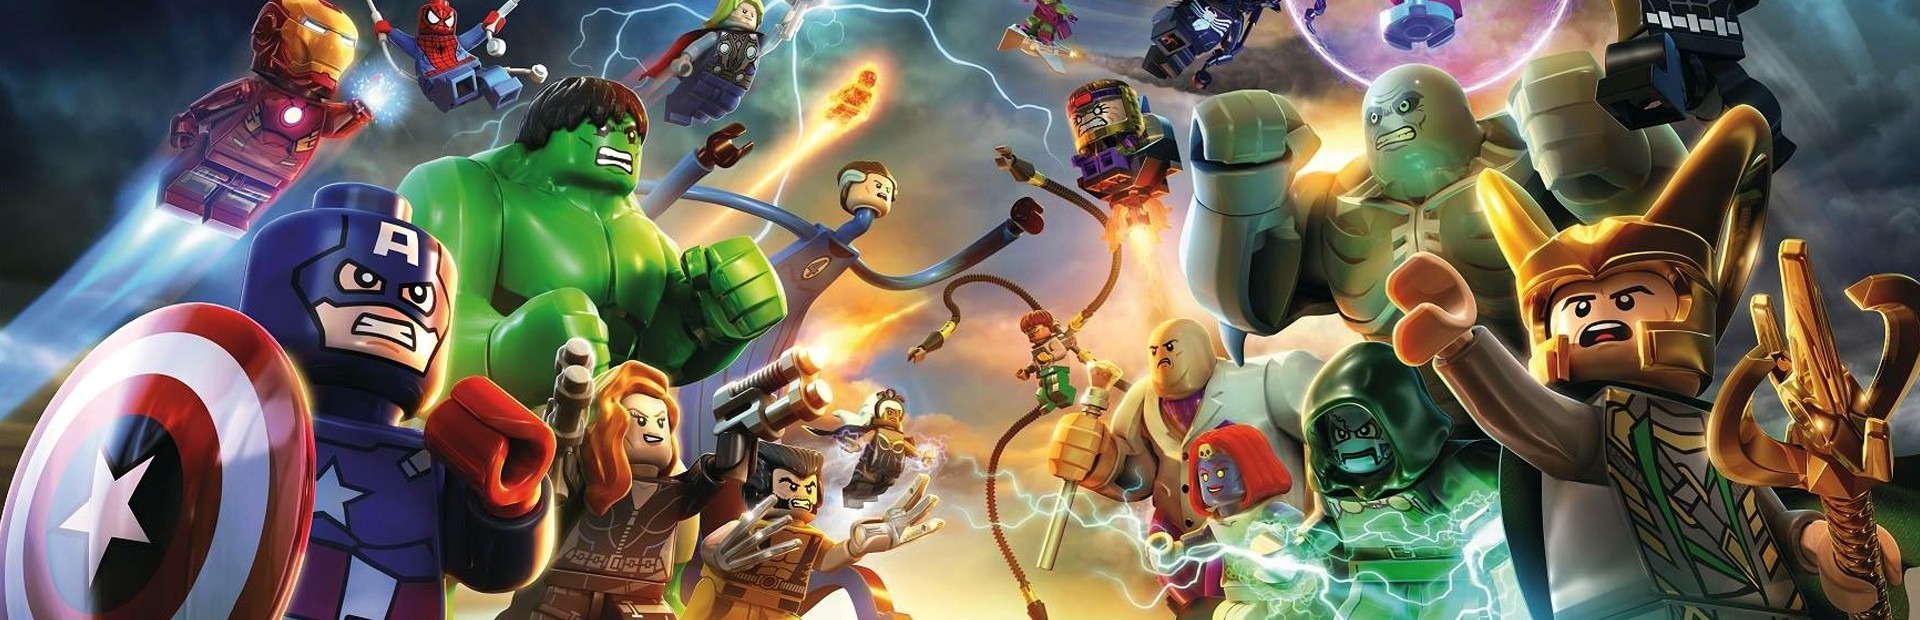 Lego Marvel Super Heroes Switch